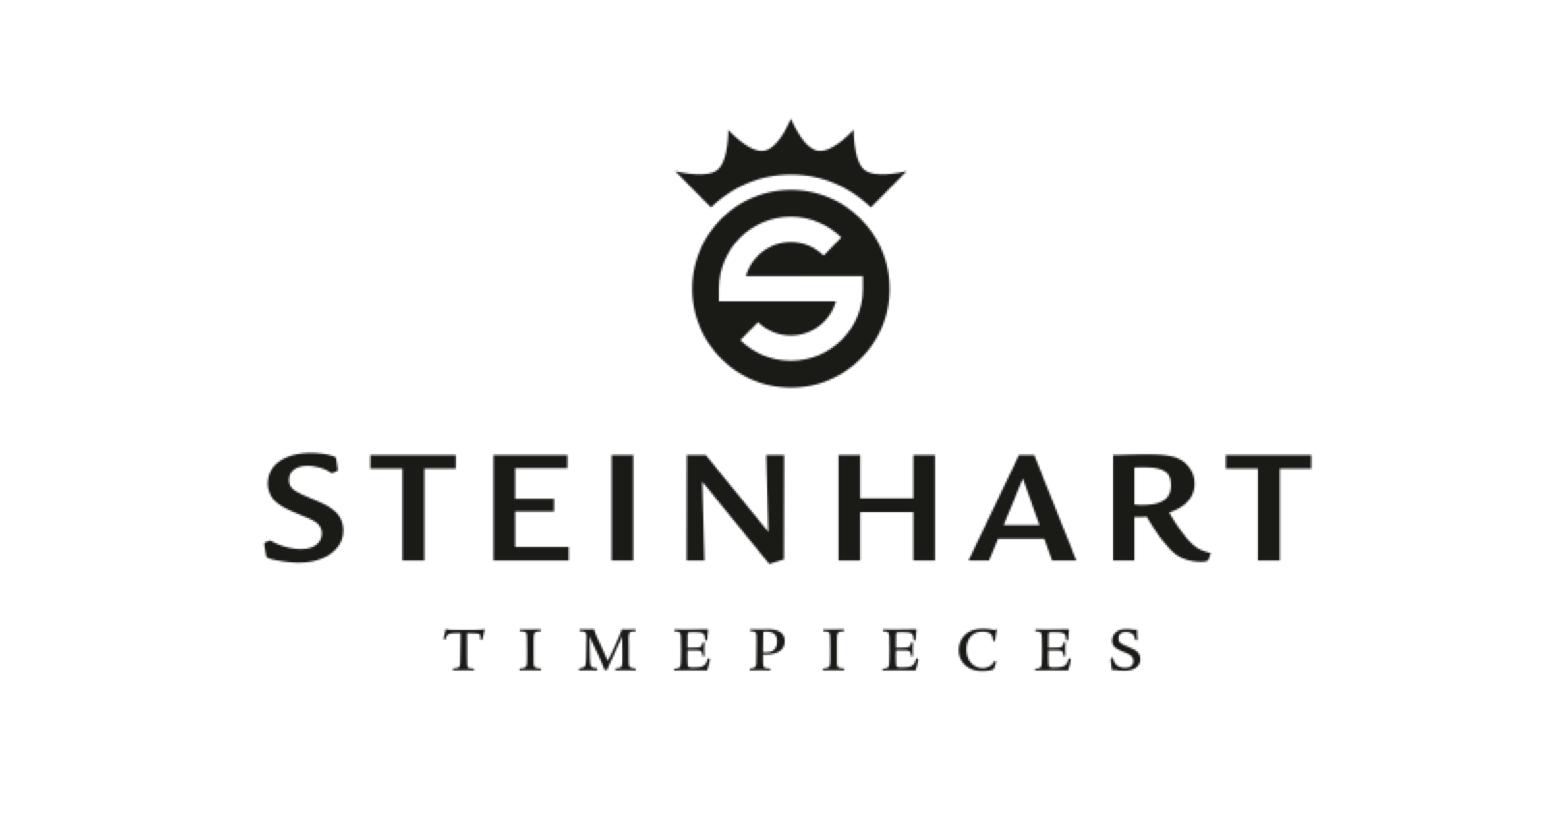 d'horlogerie - We are official distributor for Steinhart watches in Germany 